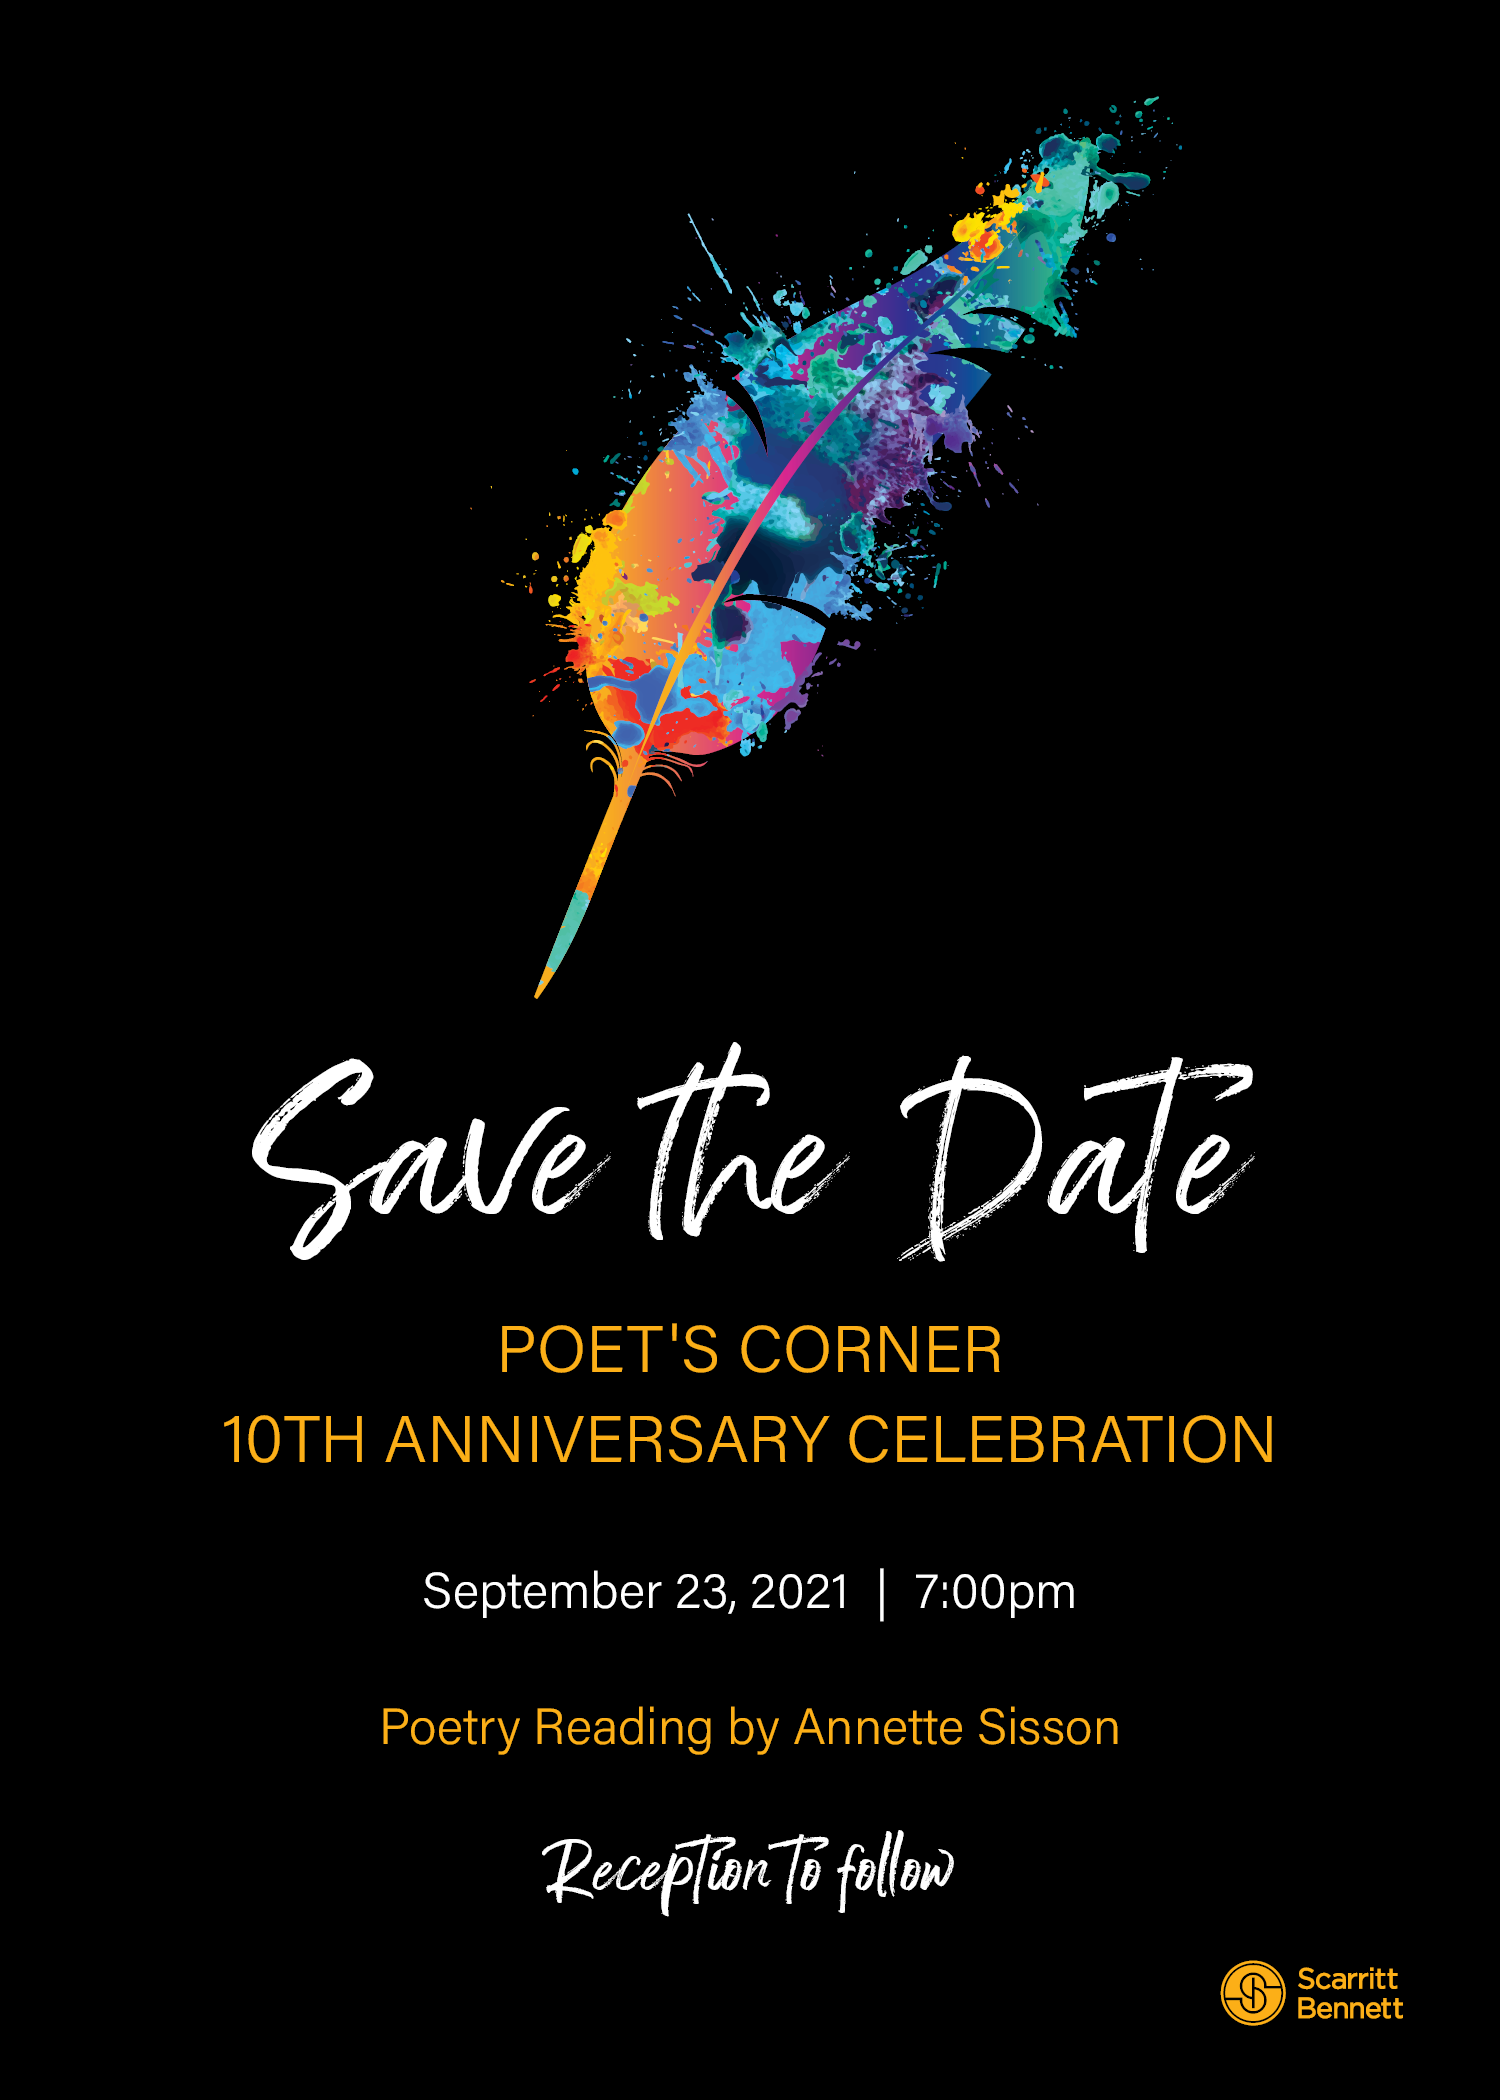 Poet's Corner 10th Anniversary Celebration. September 23, 7pm in Harambee Auditorium, with reception to follow